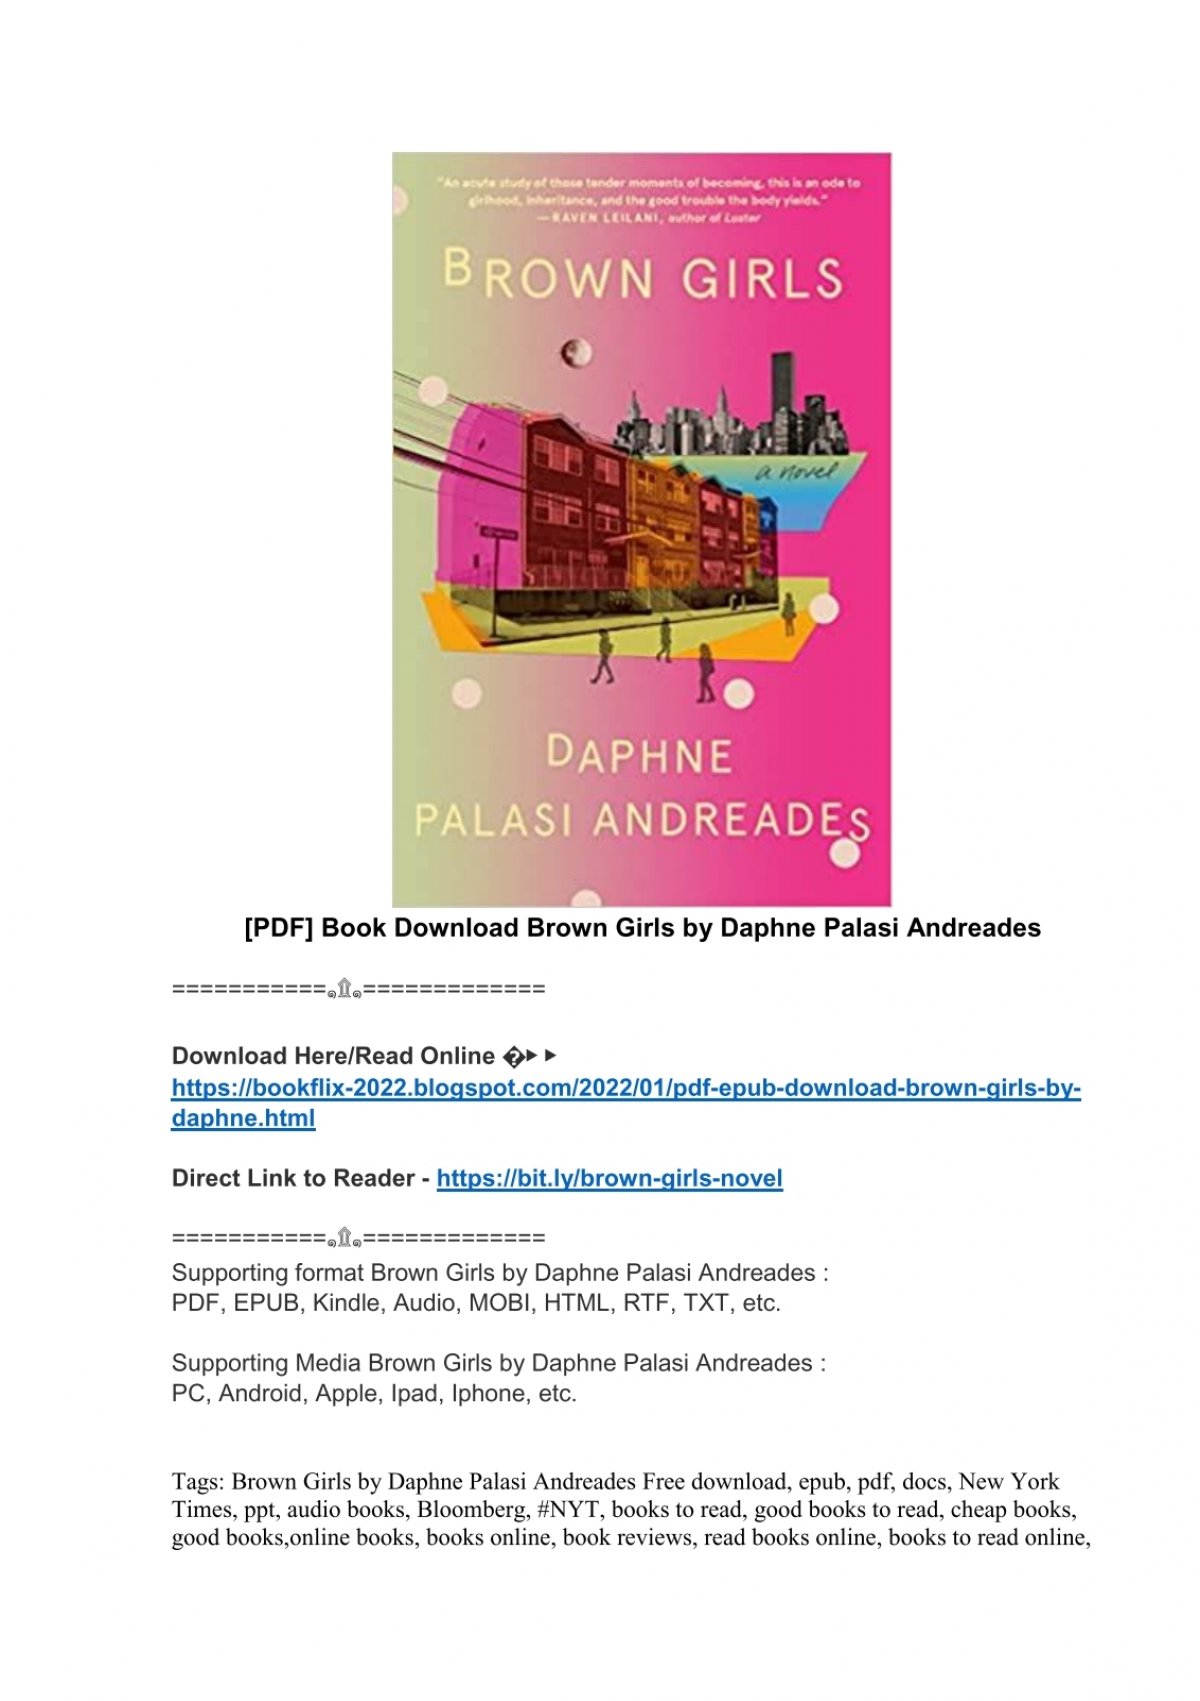 Full Book Pdf Download Brown Girls By Daphne Palasi Andreades